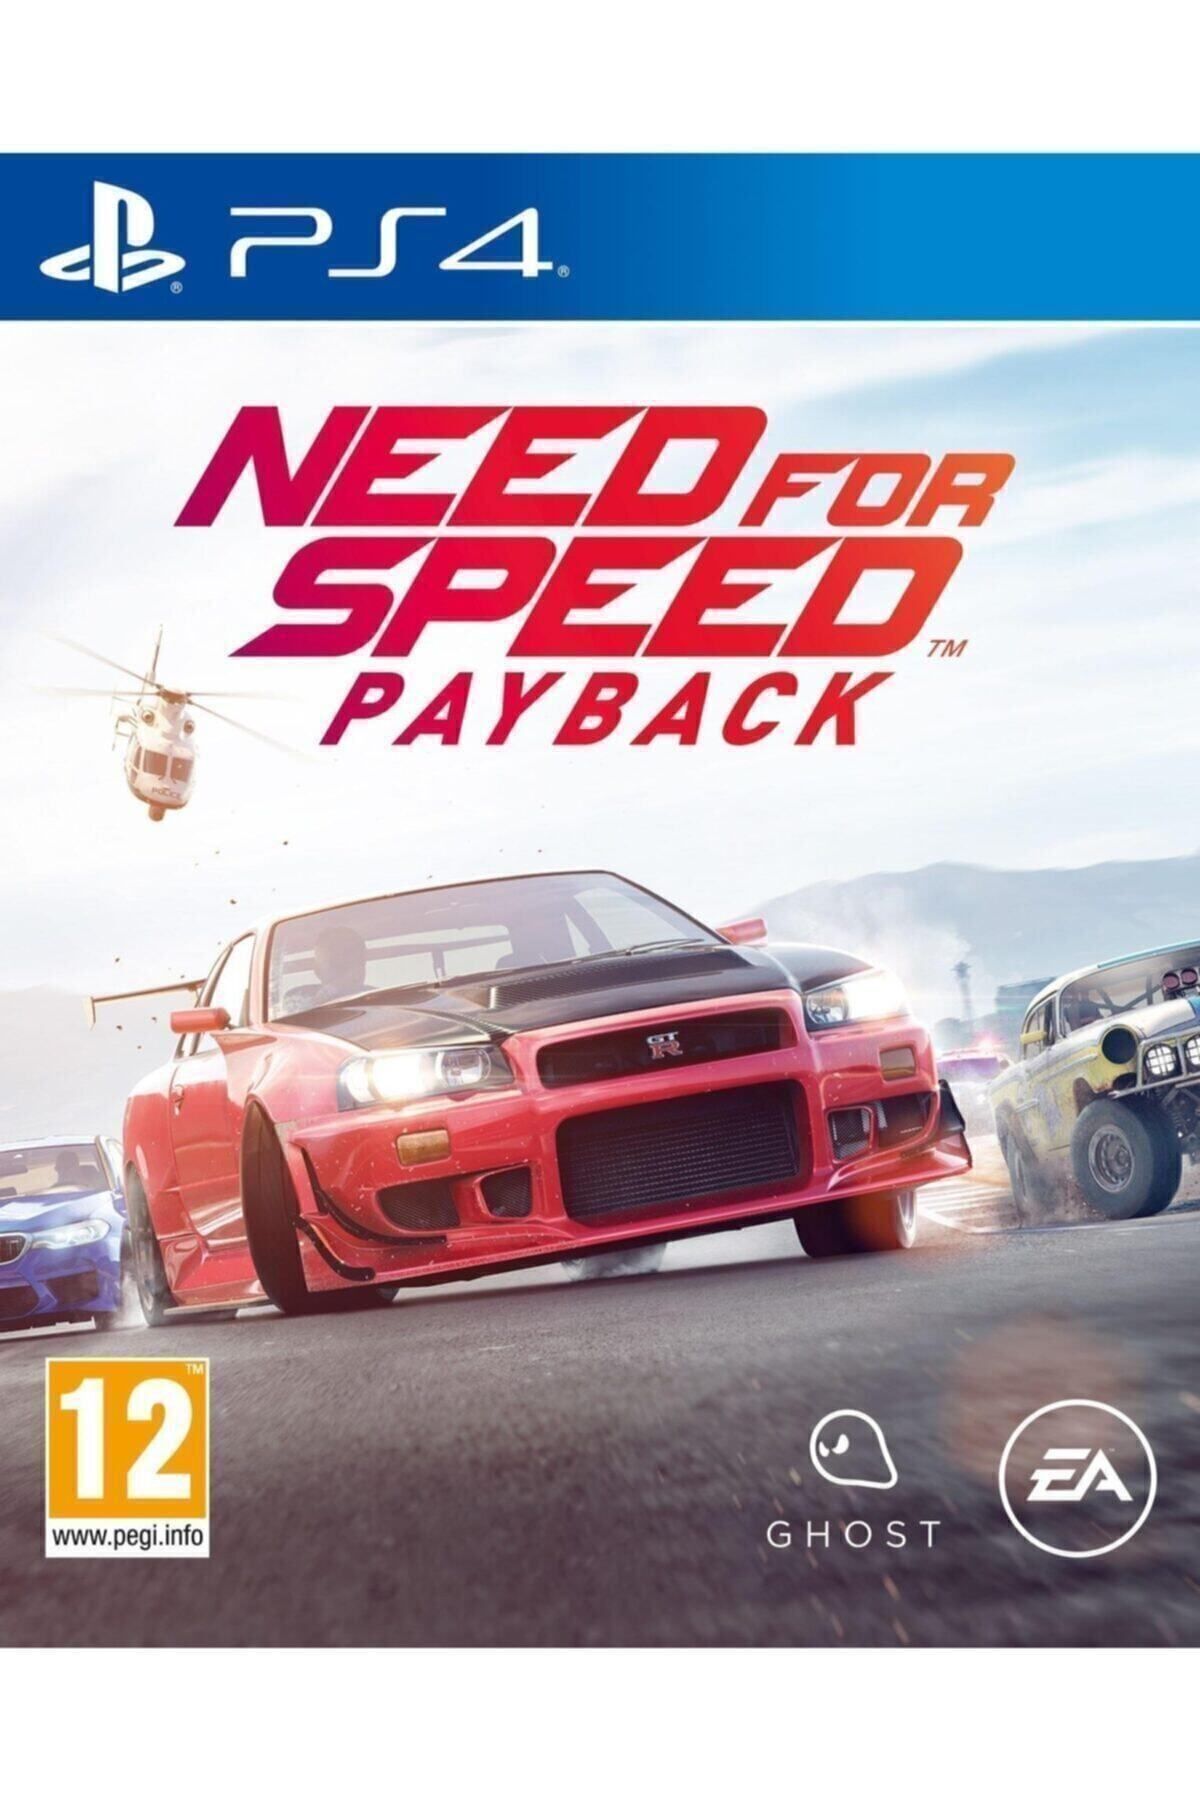 EA Games Ps4 Need For Speed Payback